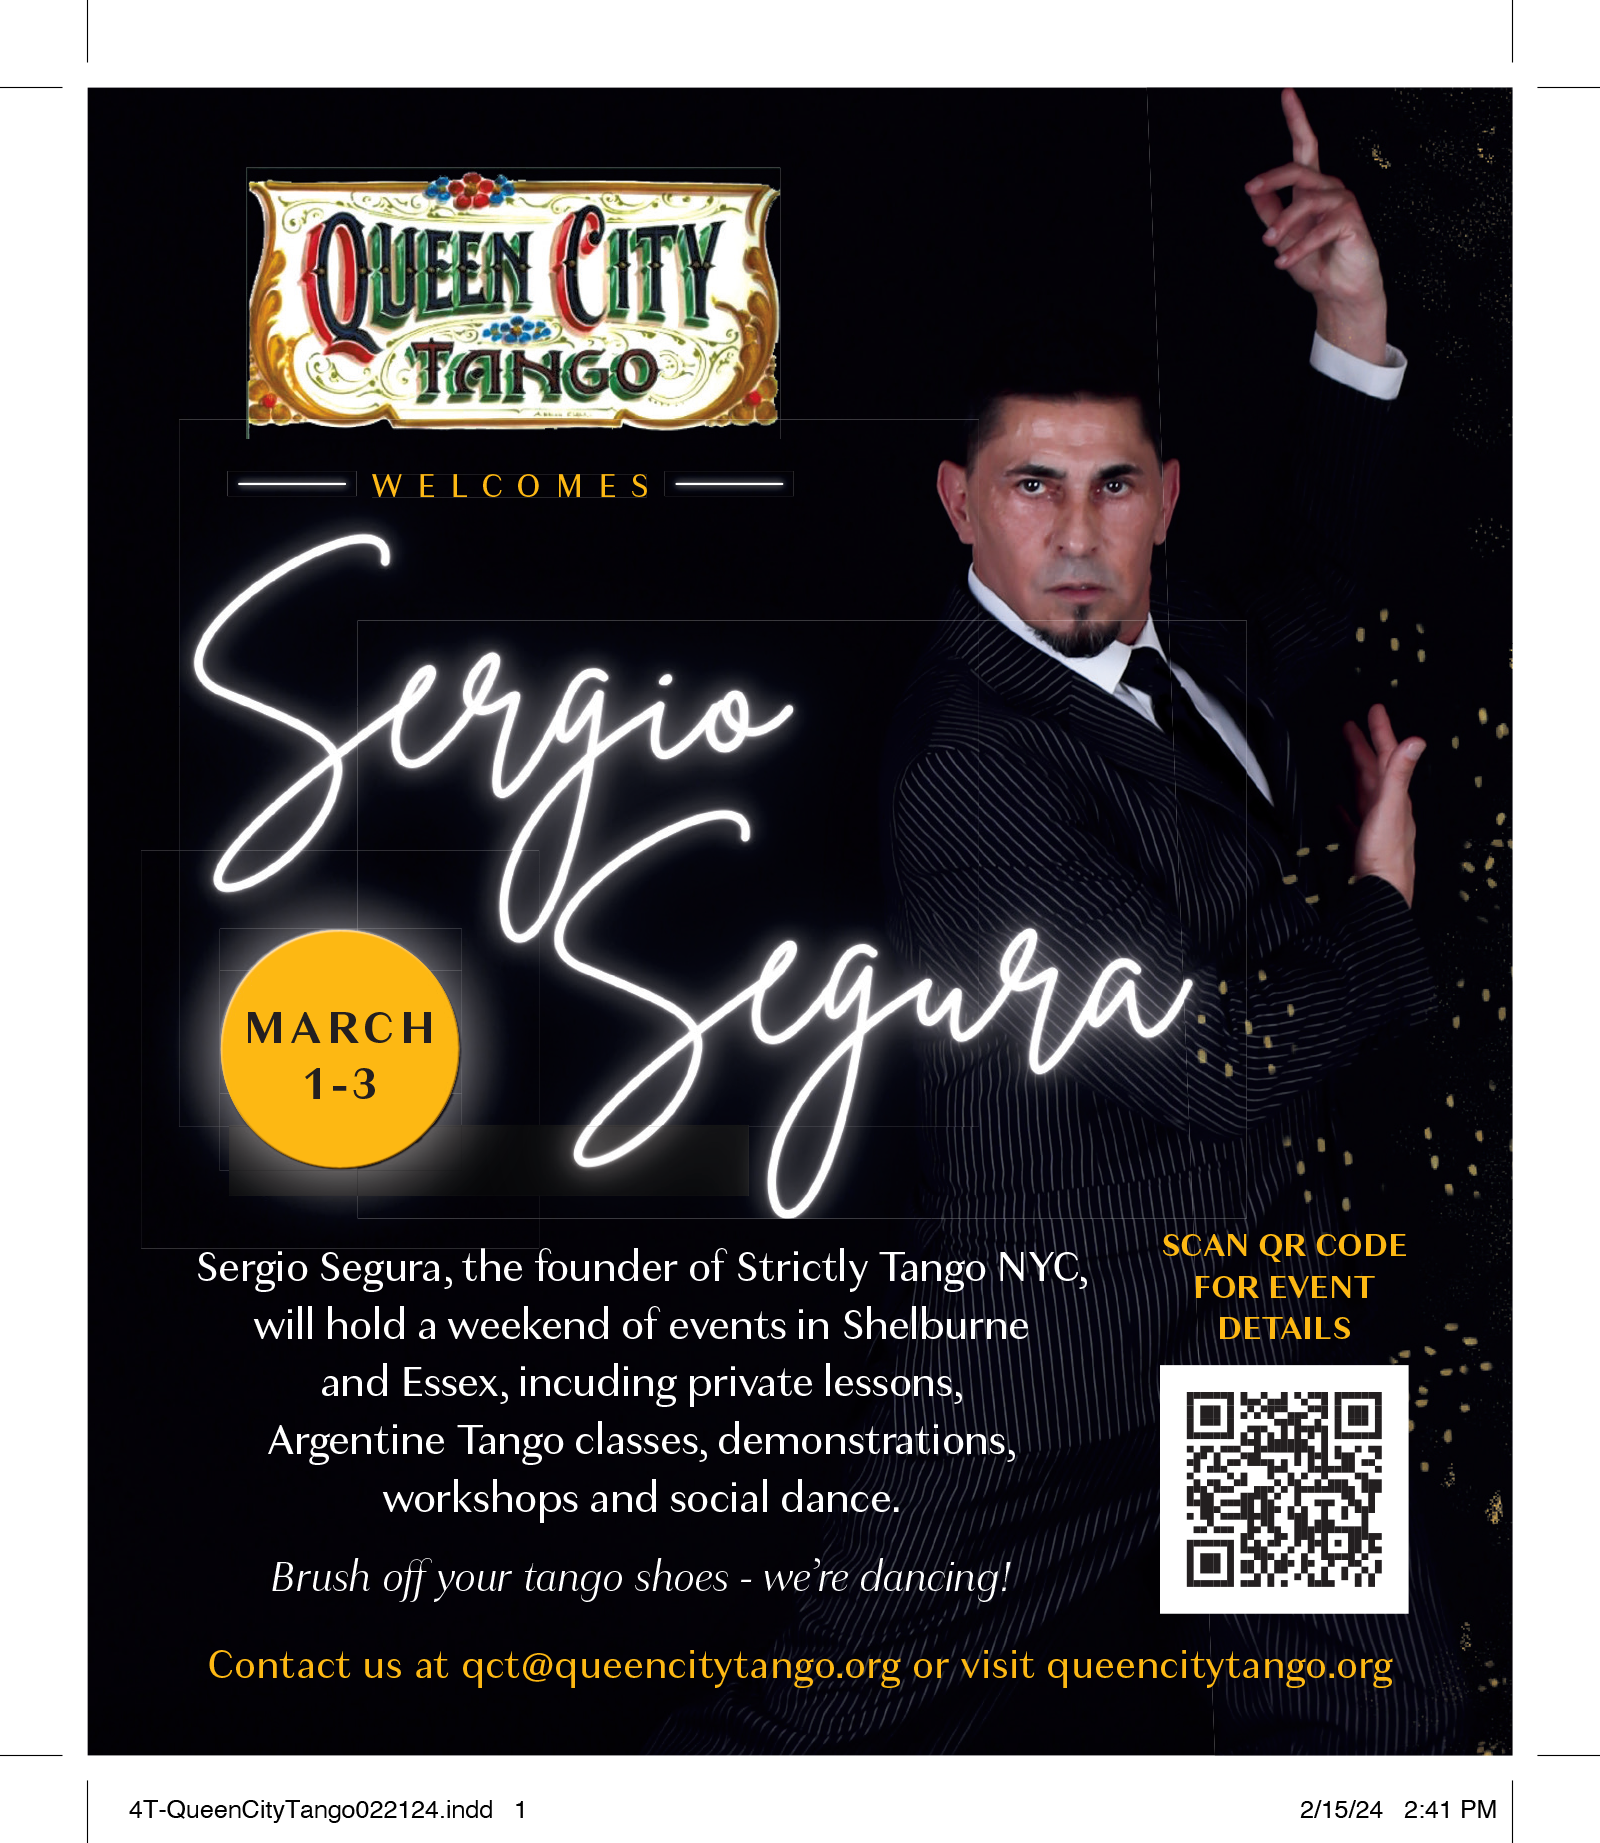 On black background, man dancing with arms raised. Scan QR code for details or visit www.queencitytango.org. .